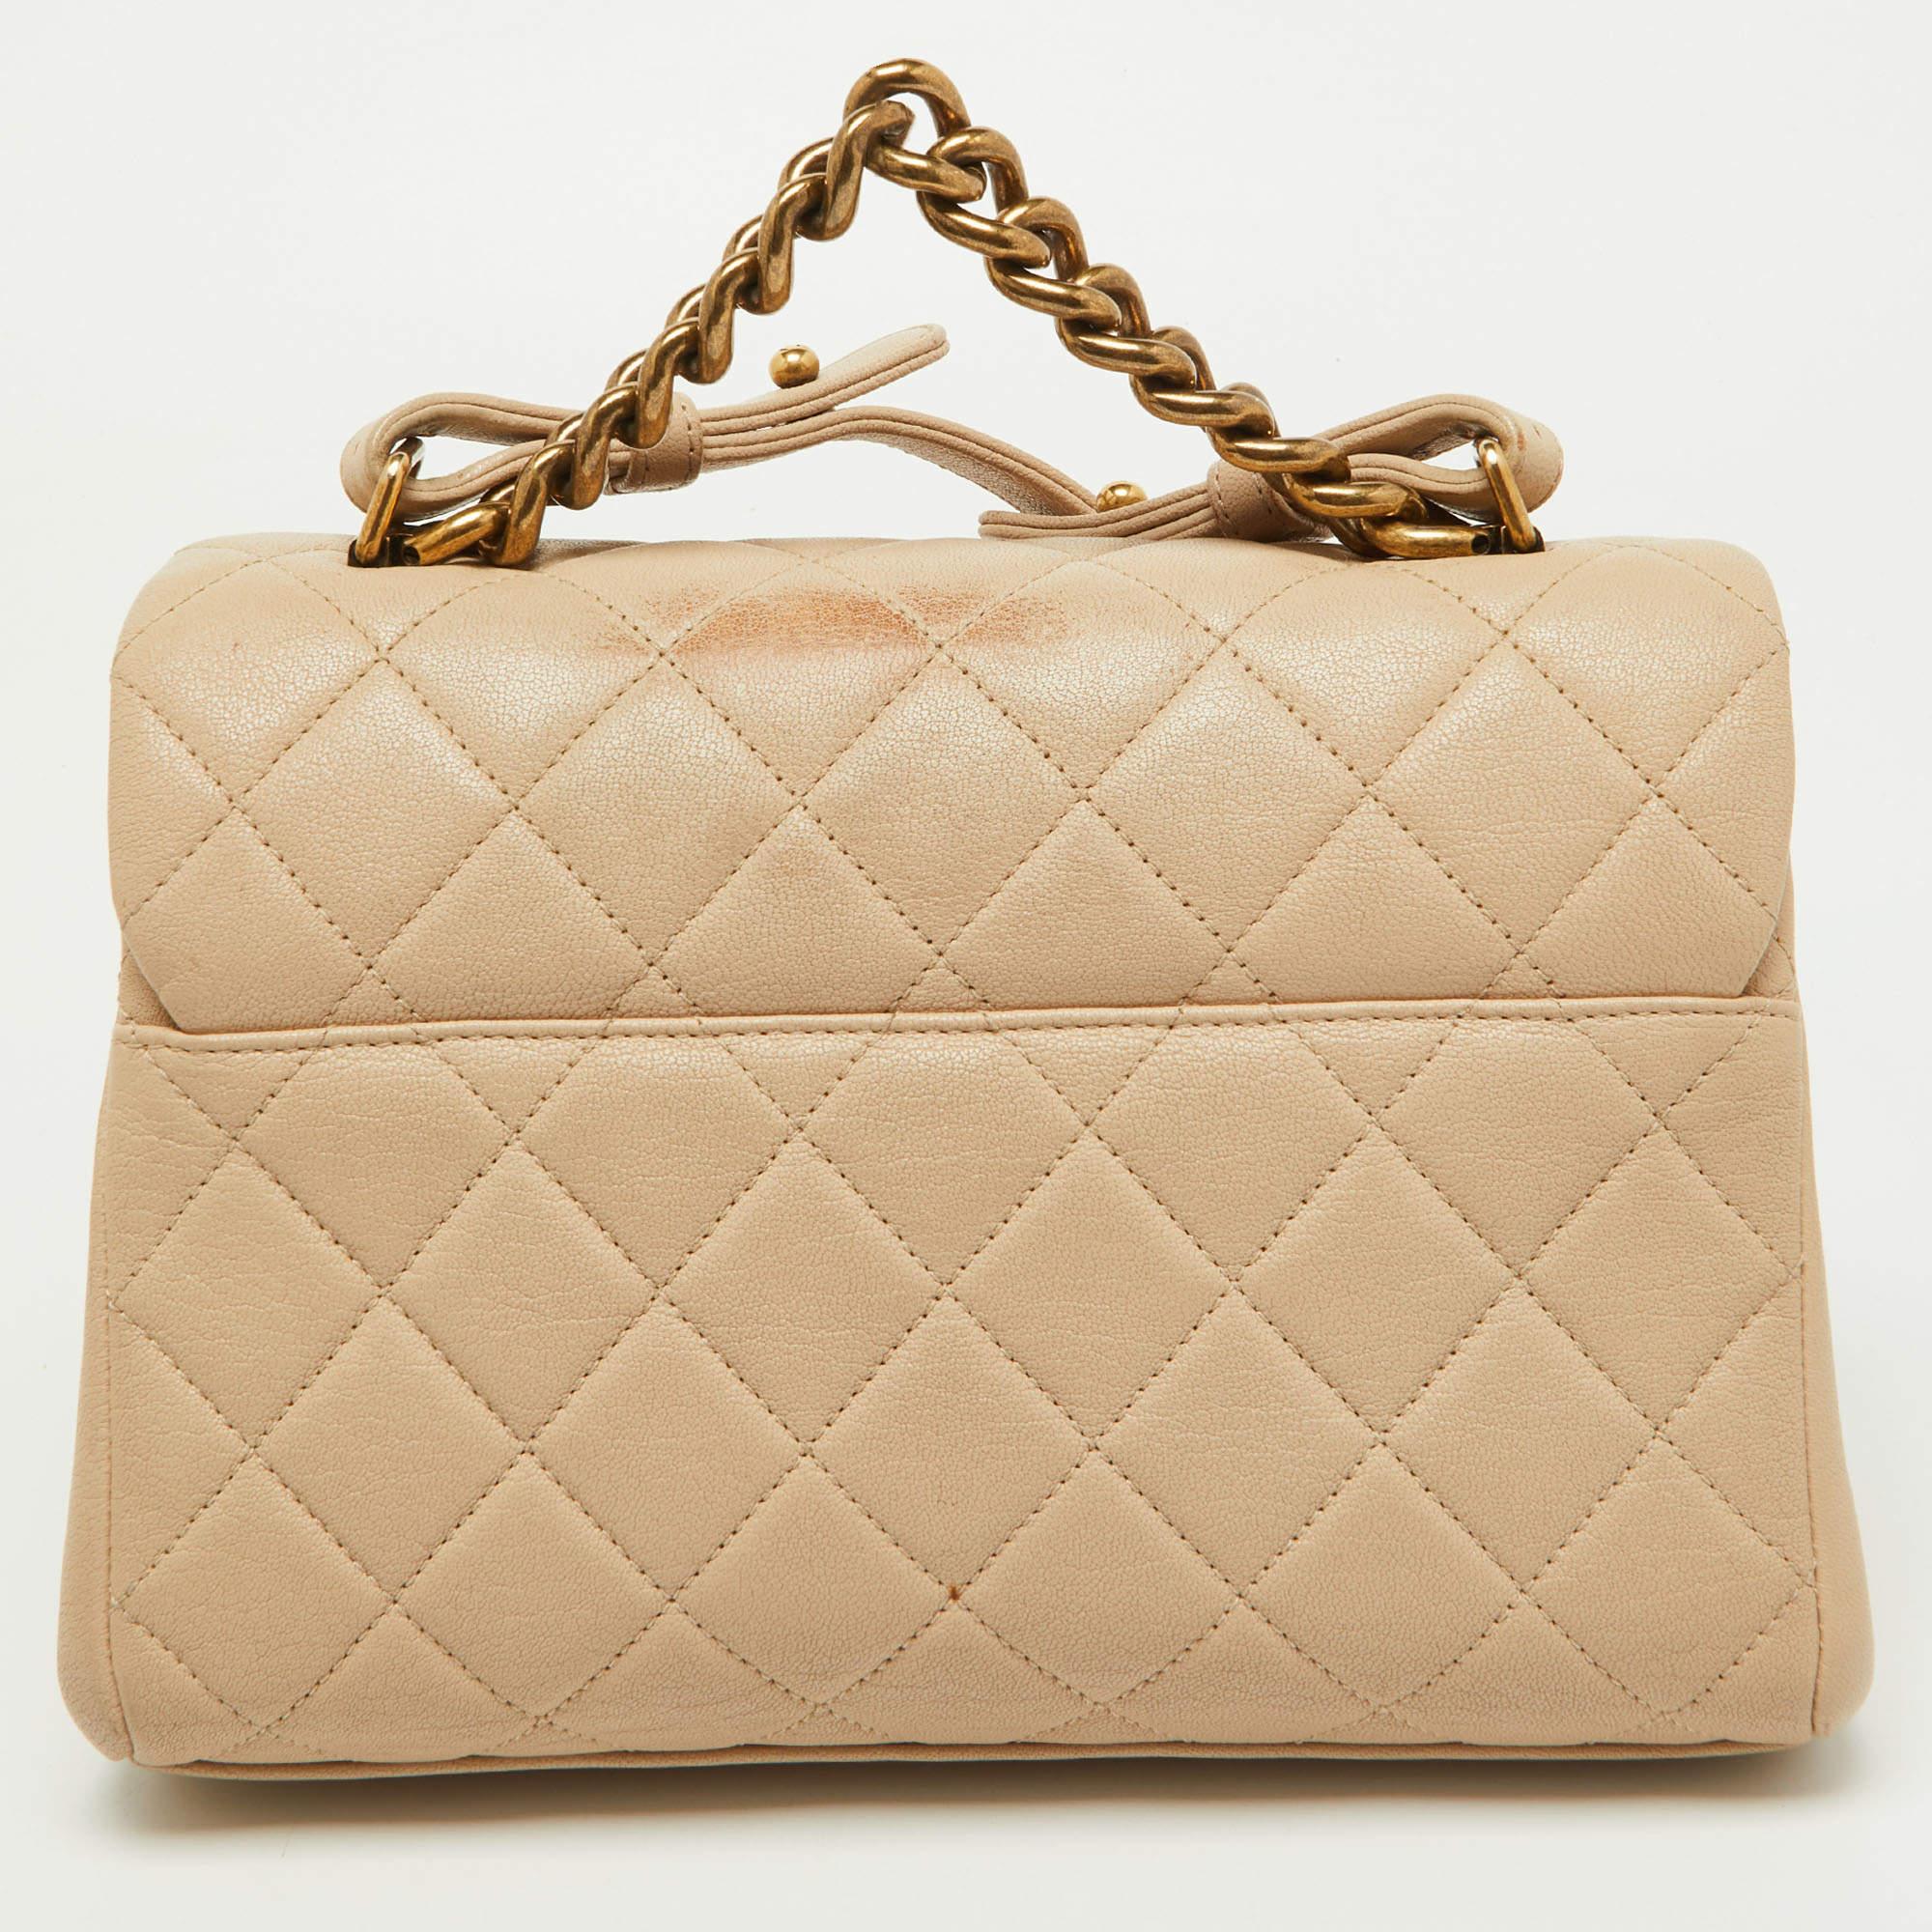 Chanel Beige Quilted Leather Small Trapezio Bag 14